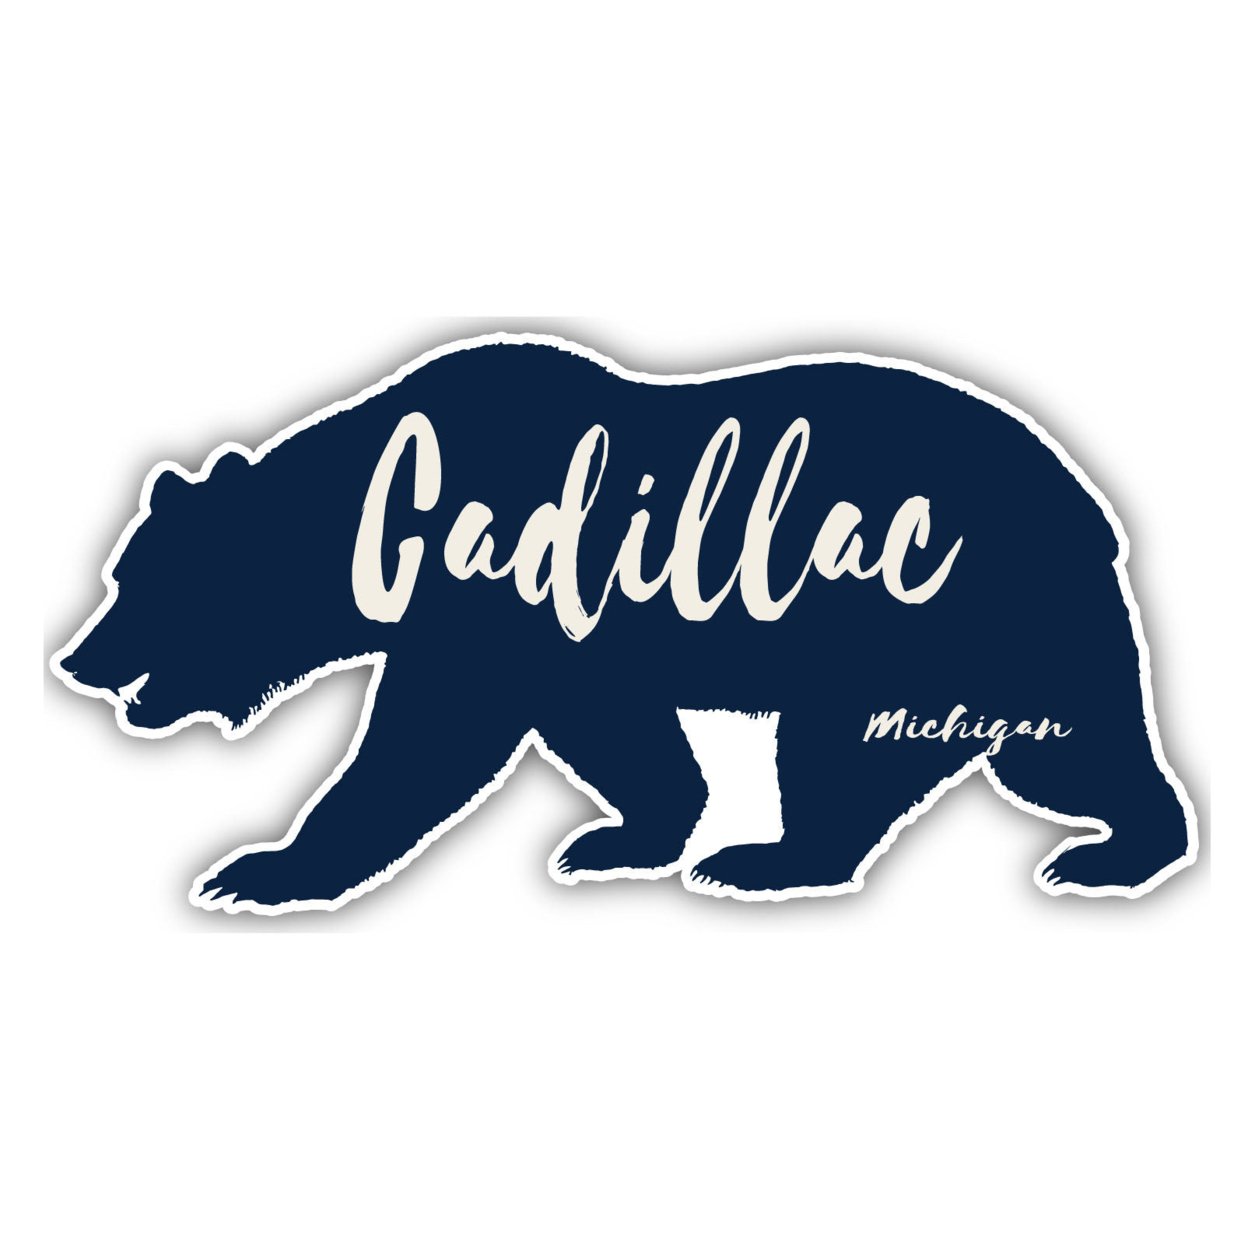 Cadillac Michigan Souvenir Decorative Stickers (Choose Theme And Size) - 4-Pack, 12-Inch, Bear